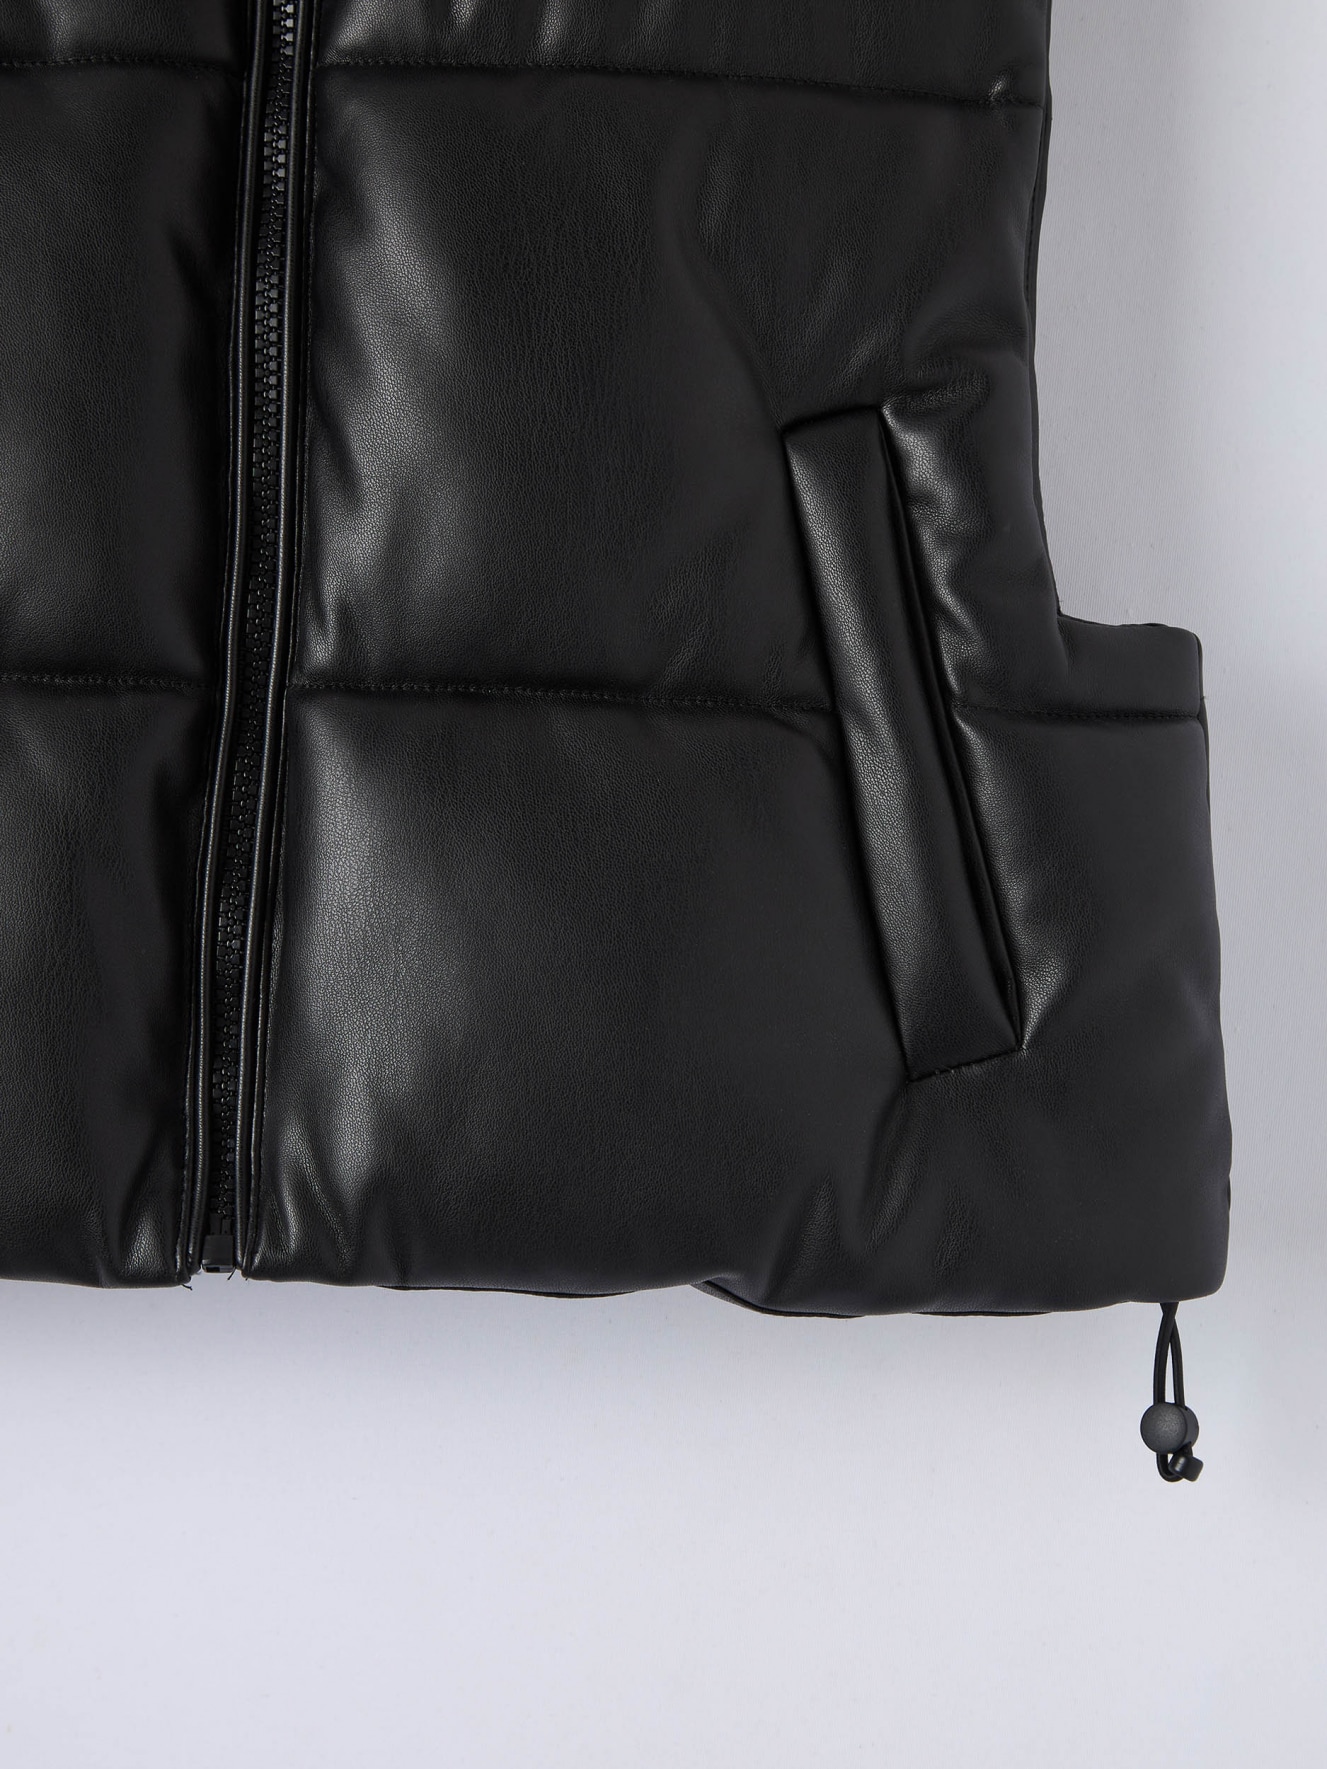 Black Cropped puffer jacket in leatherette - Buy Online